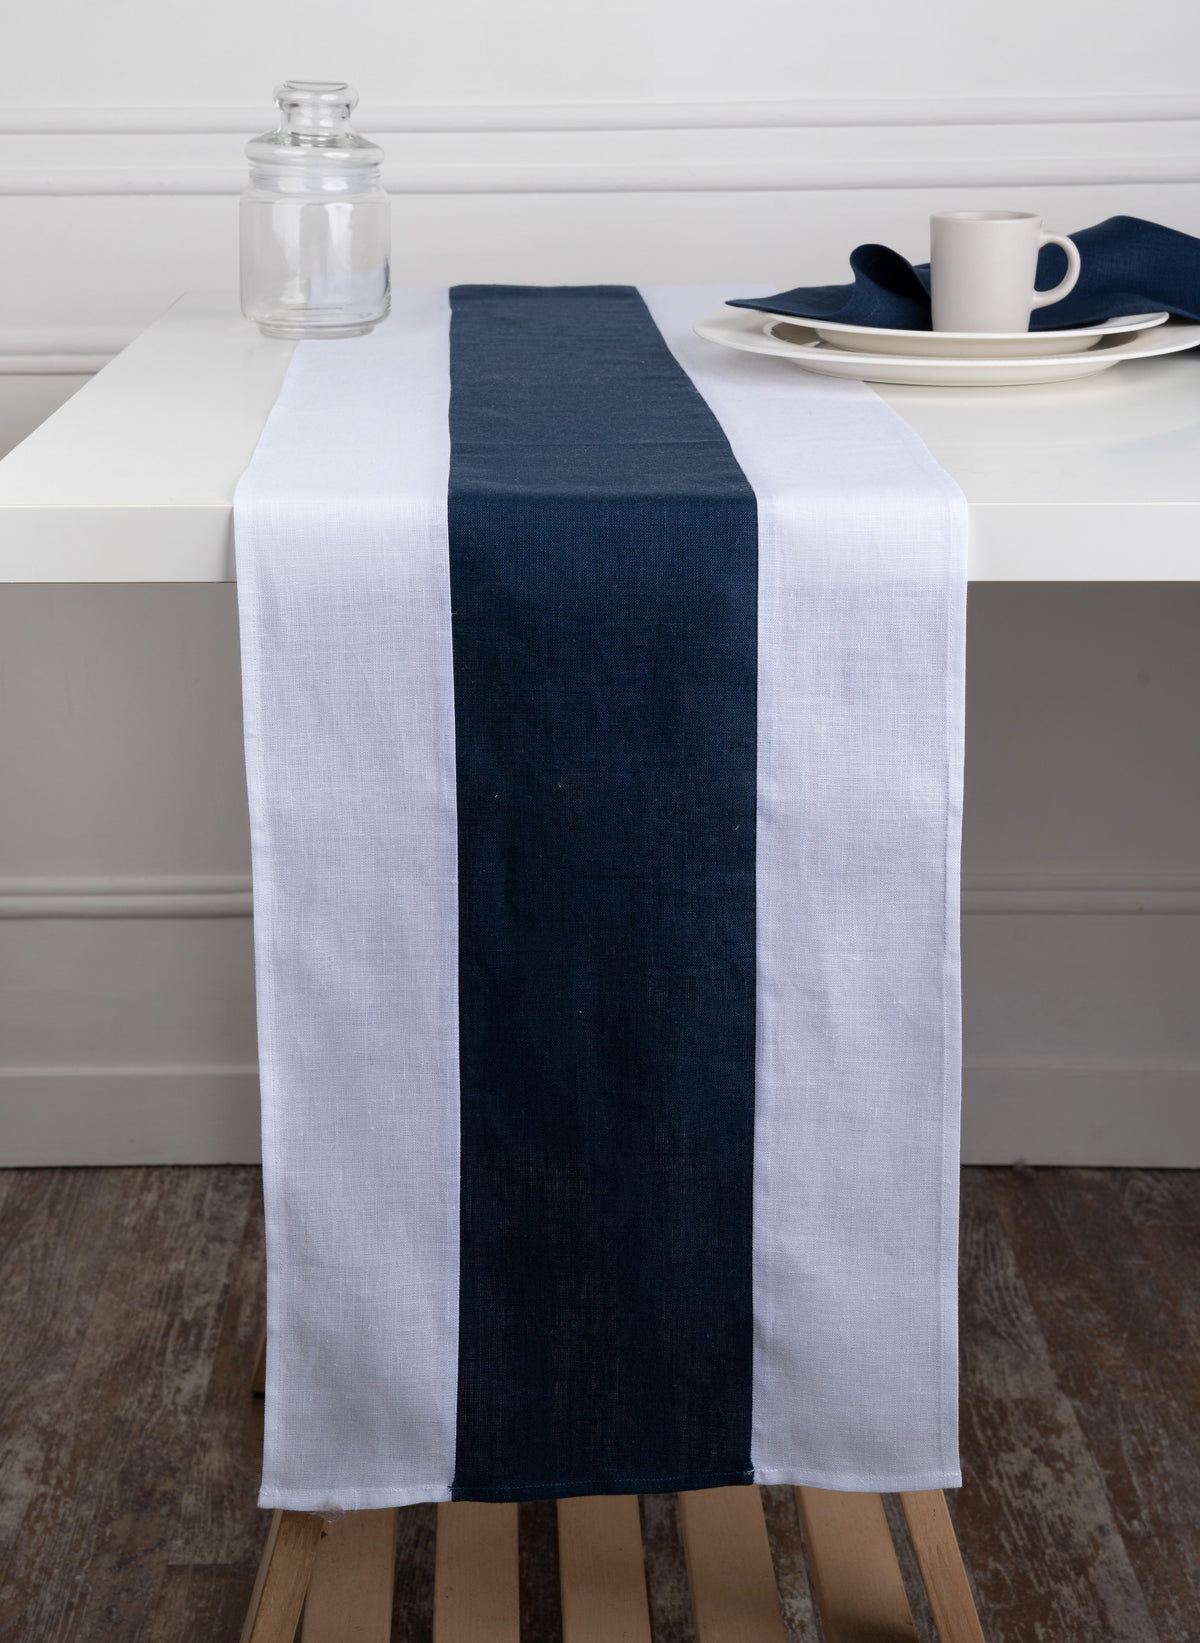 White and Navy Blue Linen Table Runner - Splicing